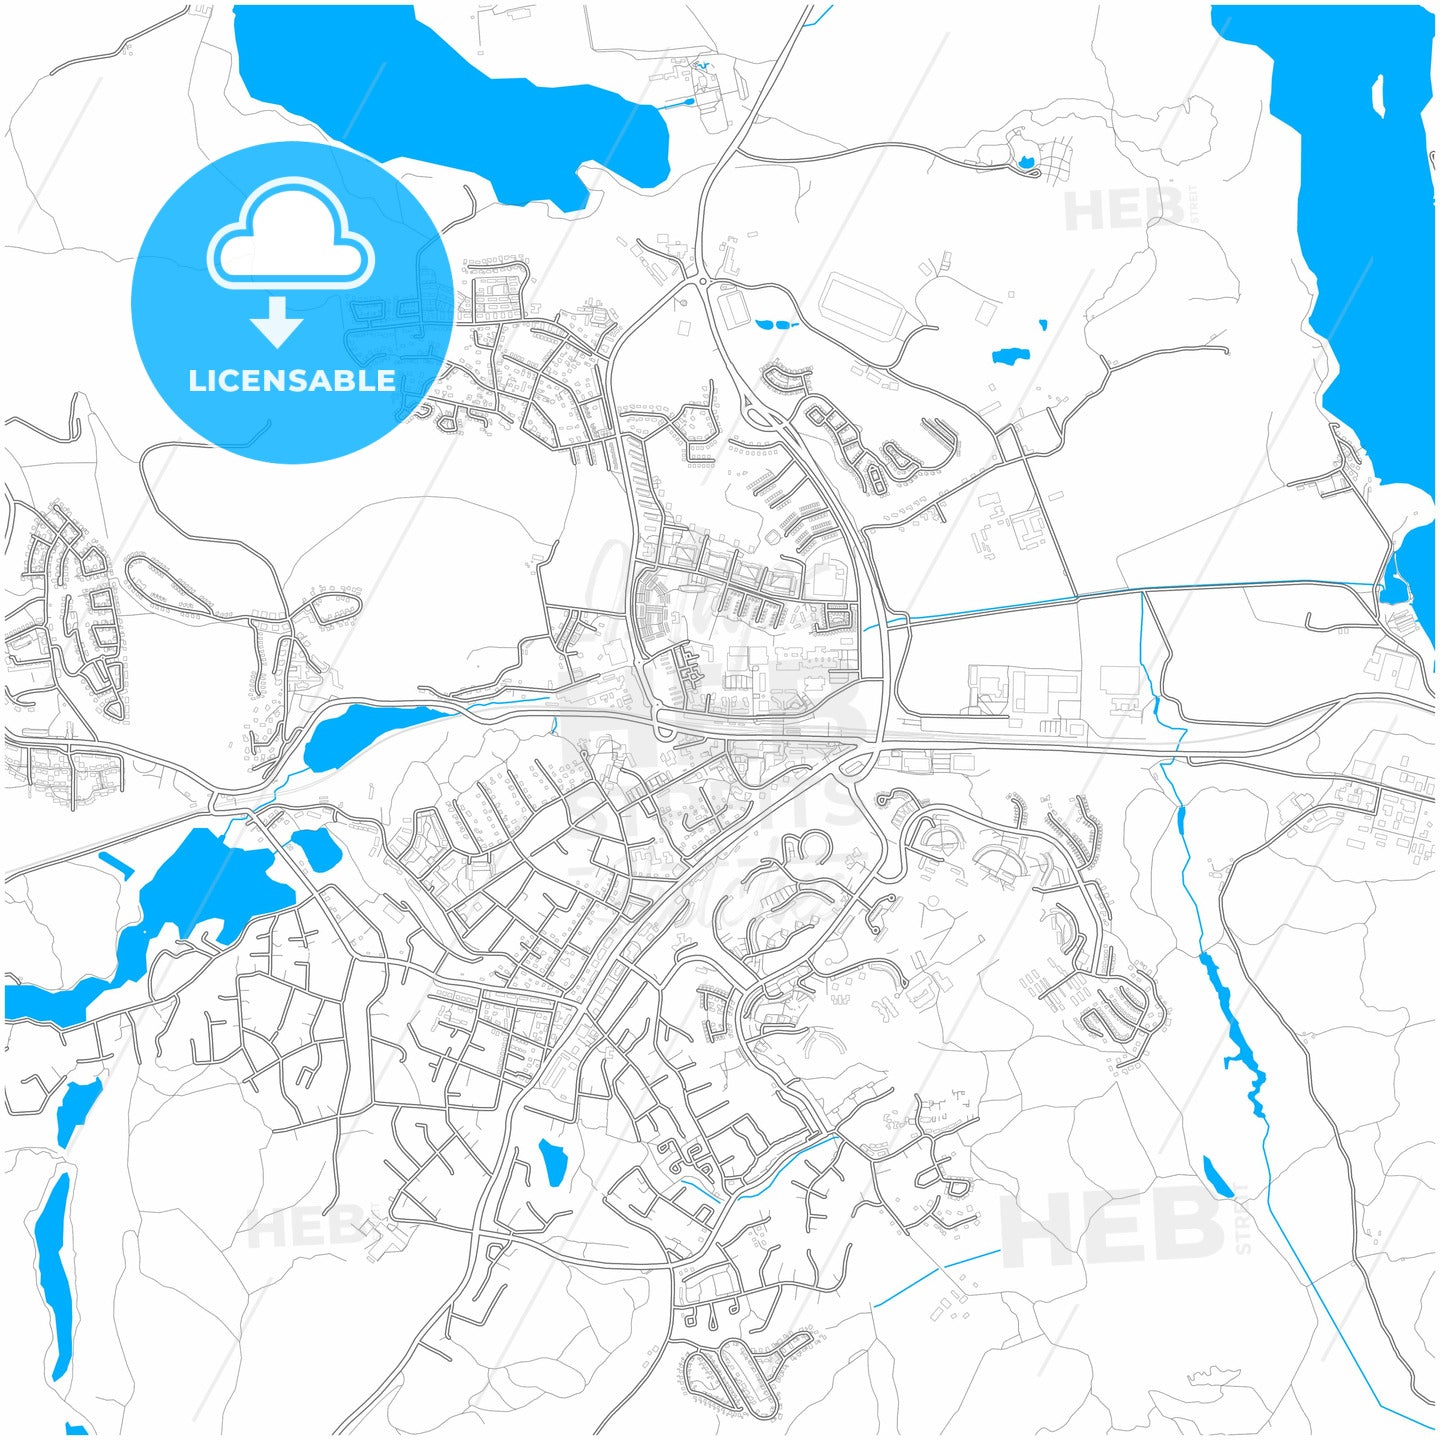 Tumba, Sweden, city map with high quality roads.